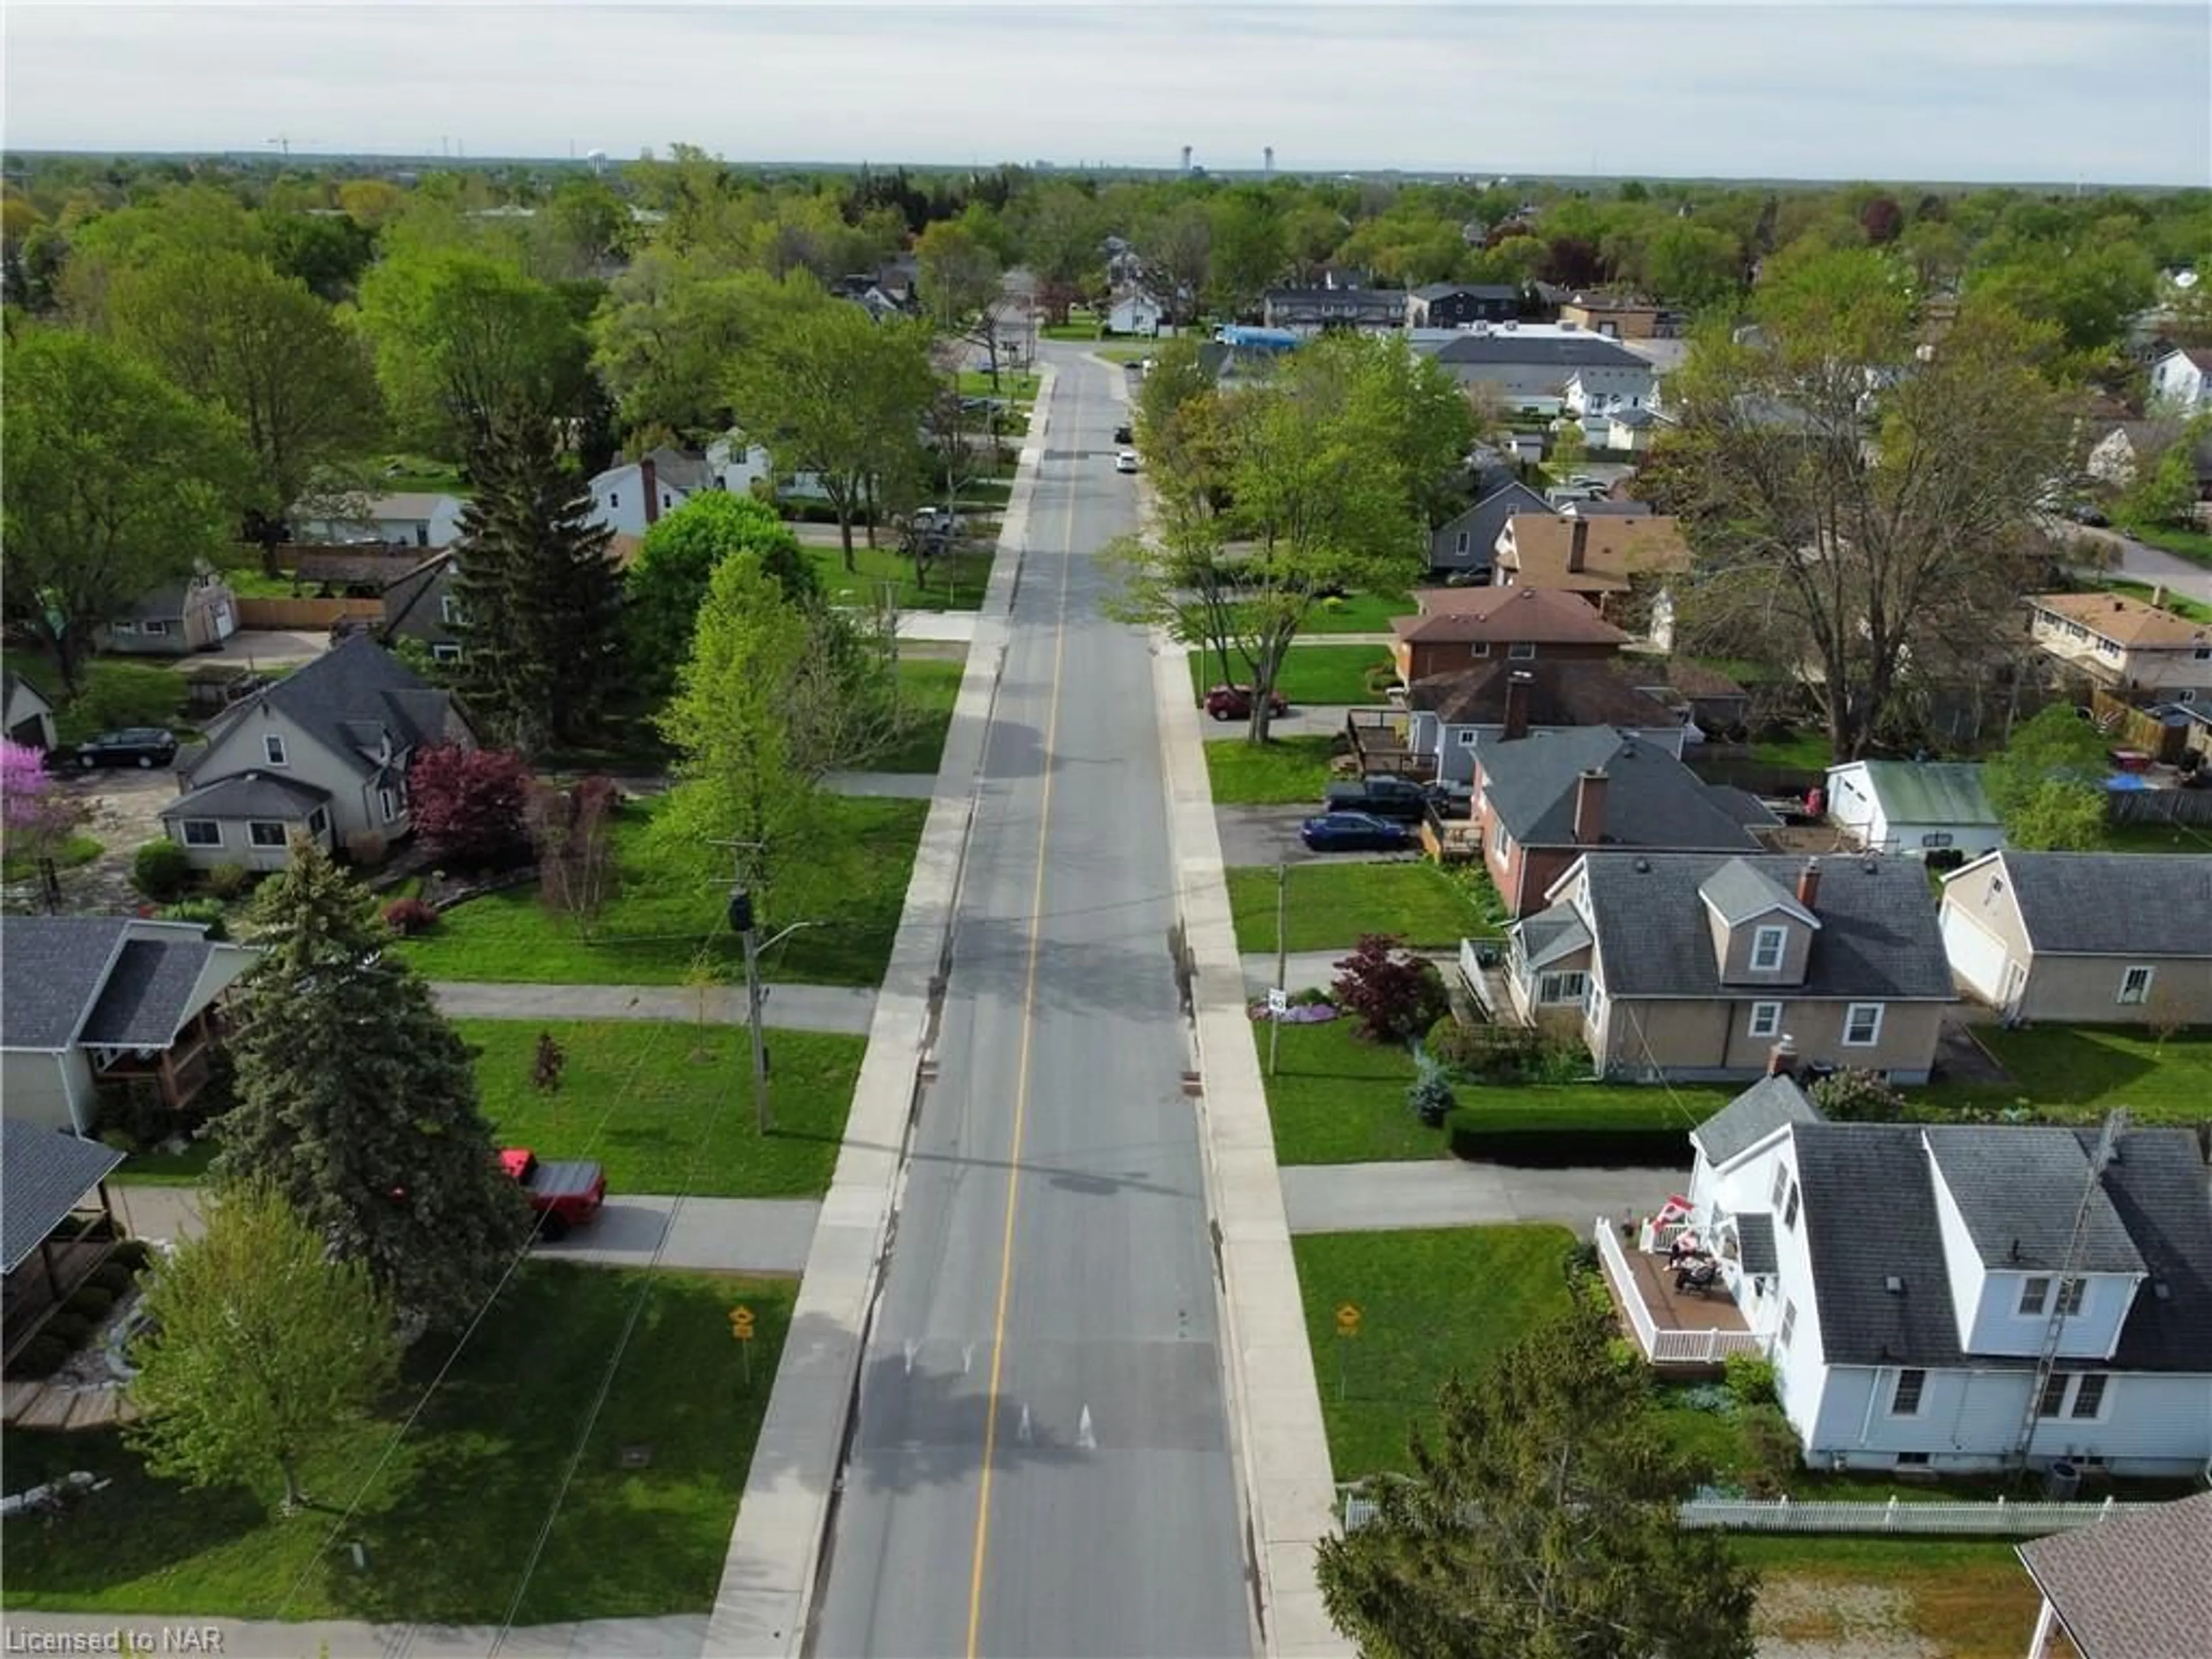 A view of a street for 357 Aqueduct St, Welland Ontario L3C 1C9